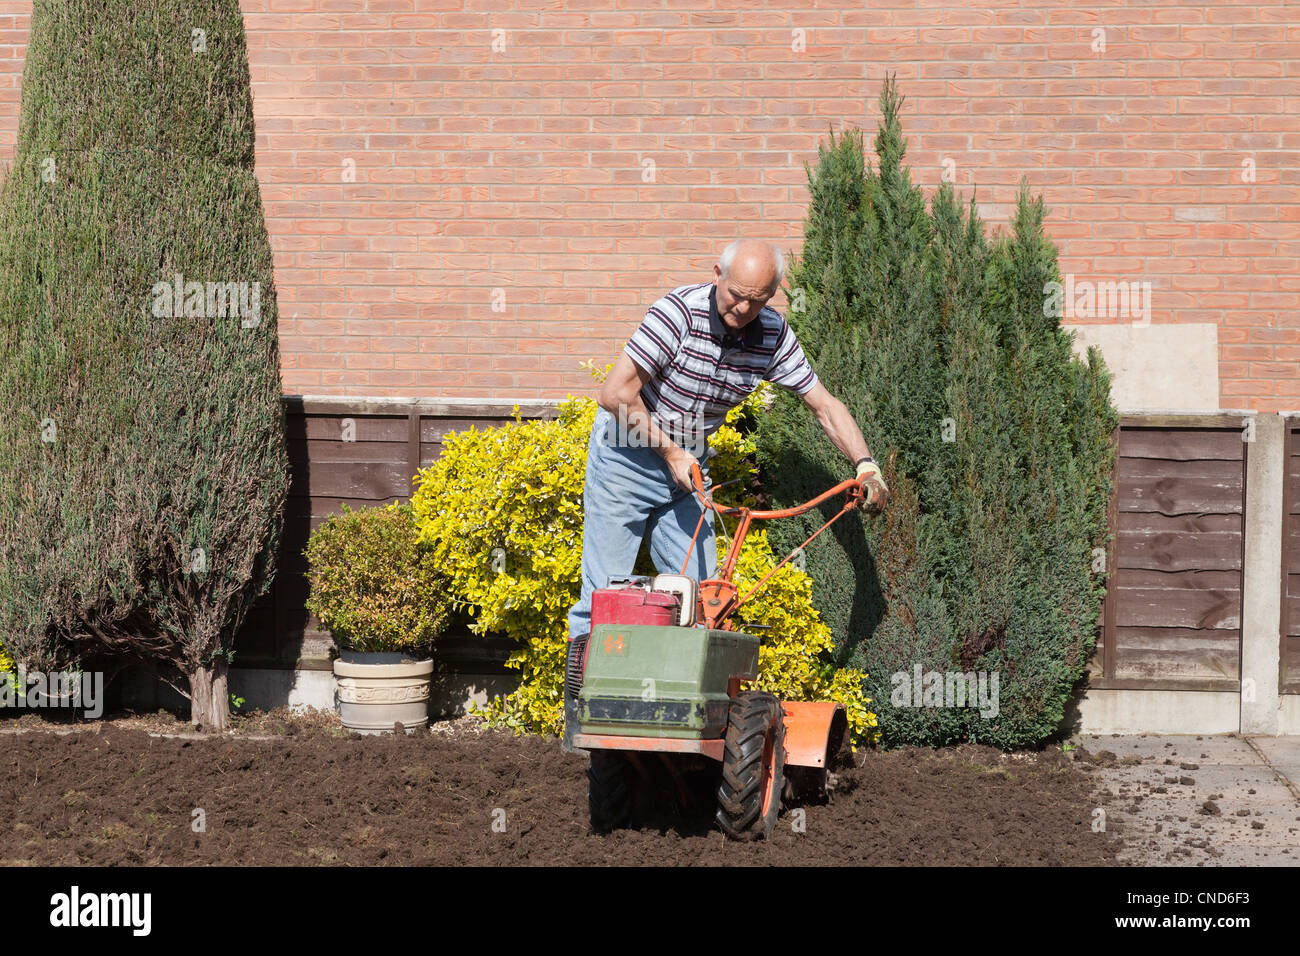 Man using rotavator to prepare soil before laying lawn turf. Stock Photo